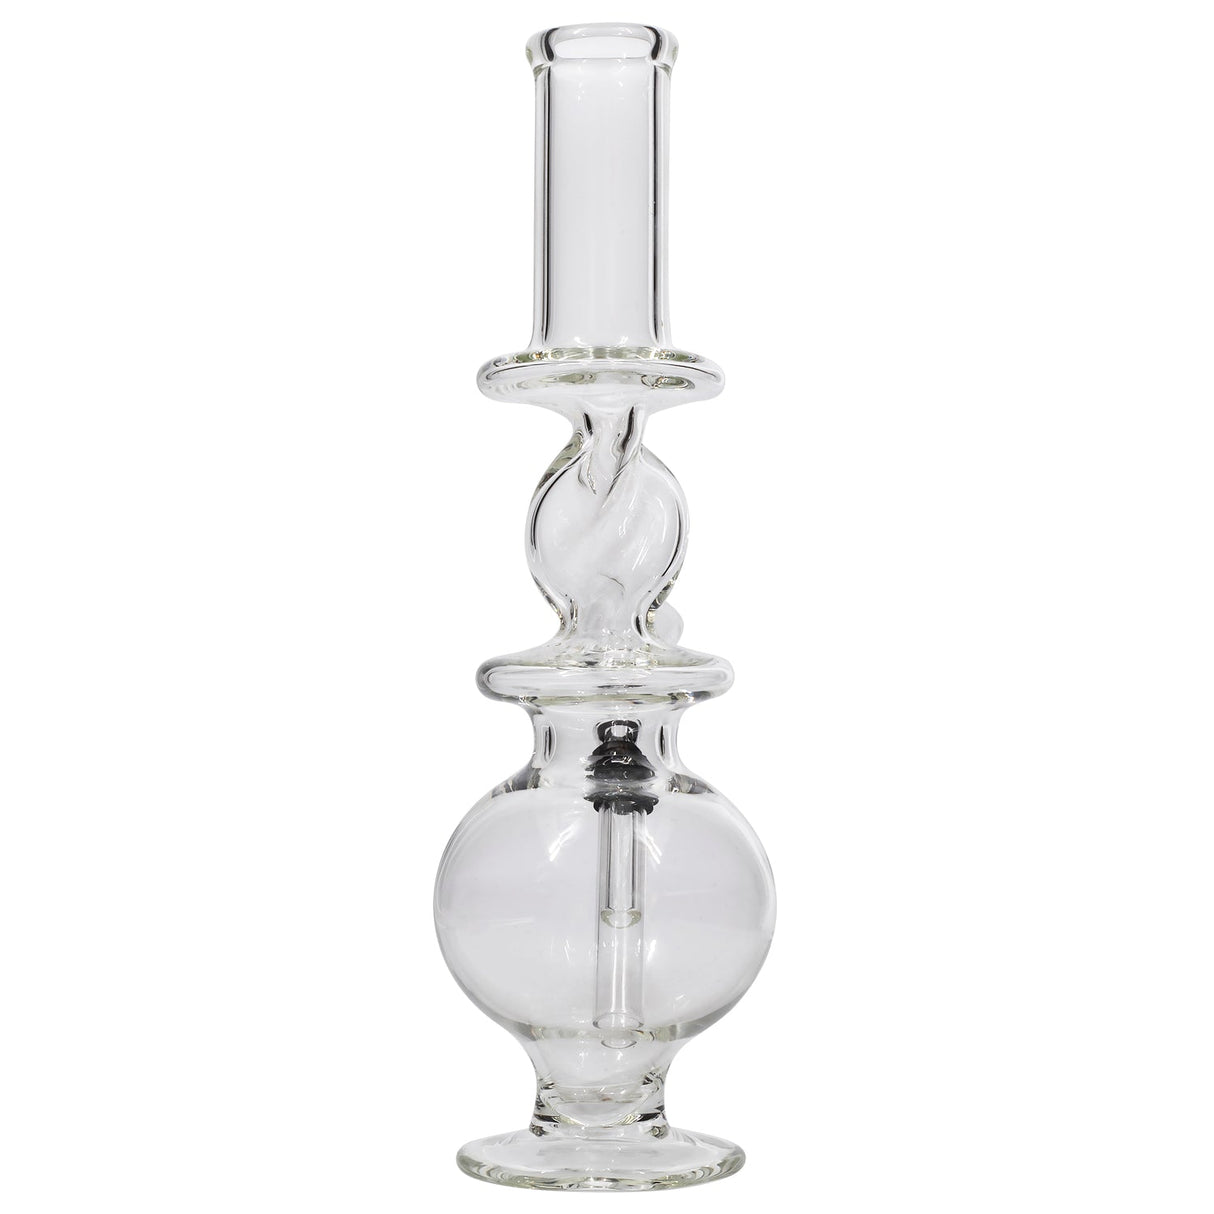 LA Pipes "The Typhoon Twister" Glass Bong with fumed color changing design, front view on white background